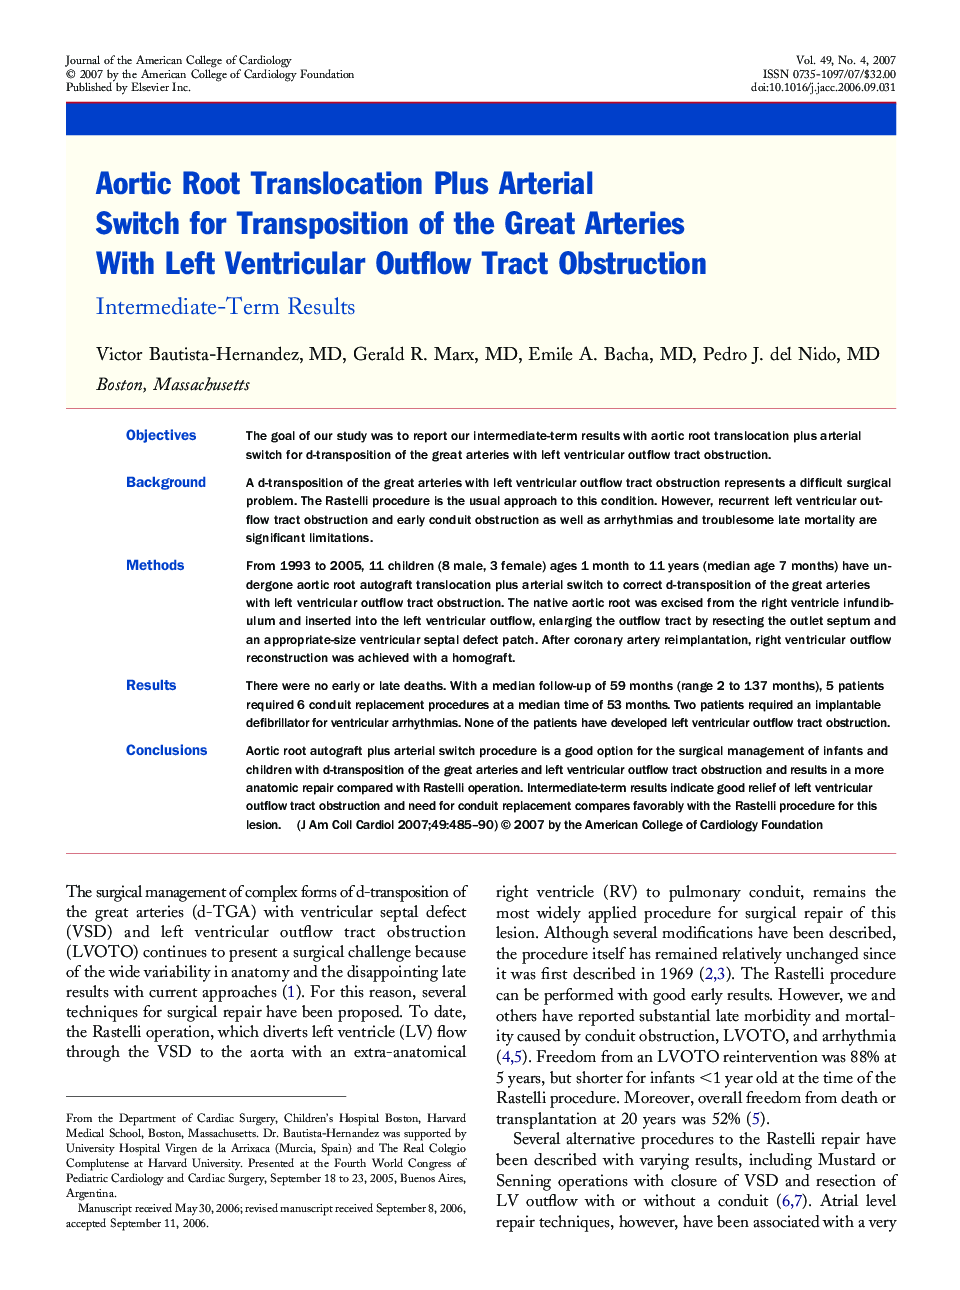 Aortic Root Translocation Plus Arterial Switch for Transposition of the Great Arteries With Left Ventricular Outflow Tract Obstruction: Intermediate-Term Results